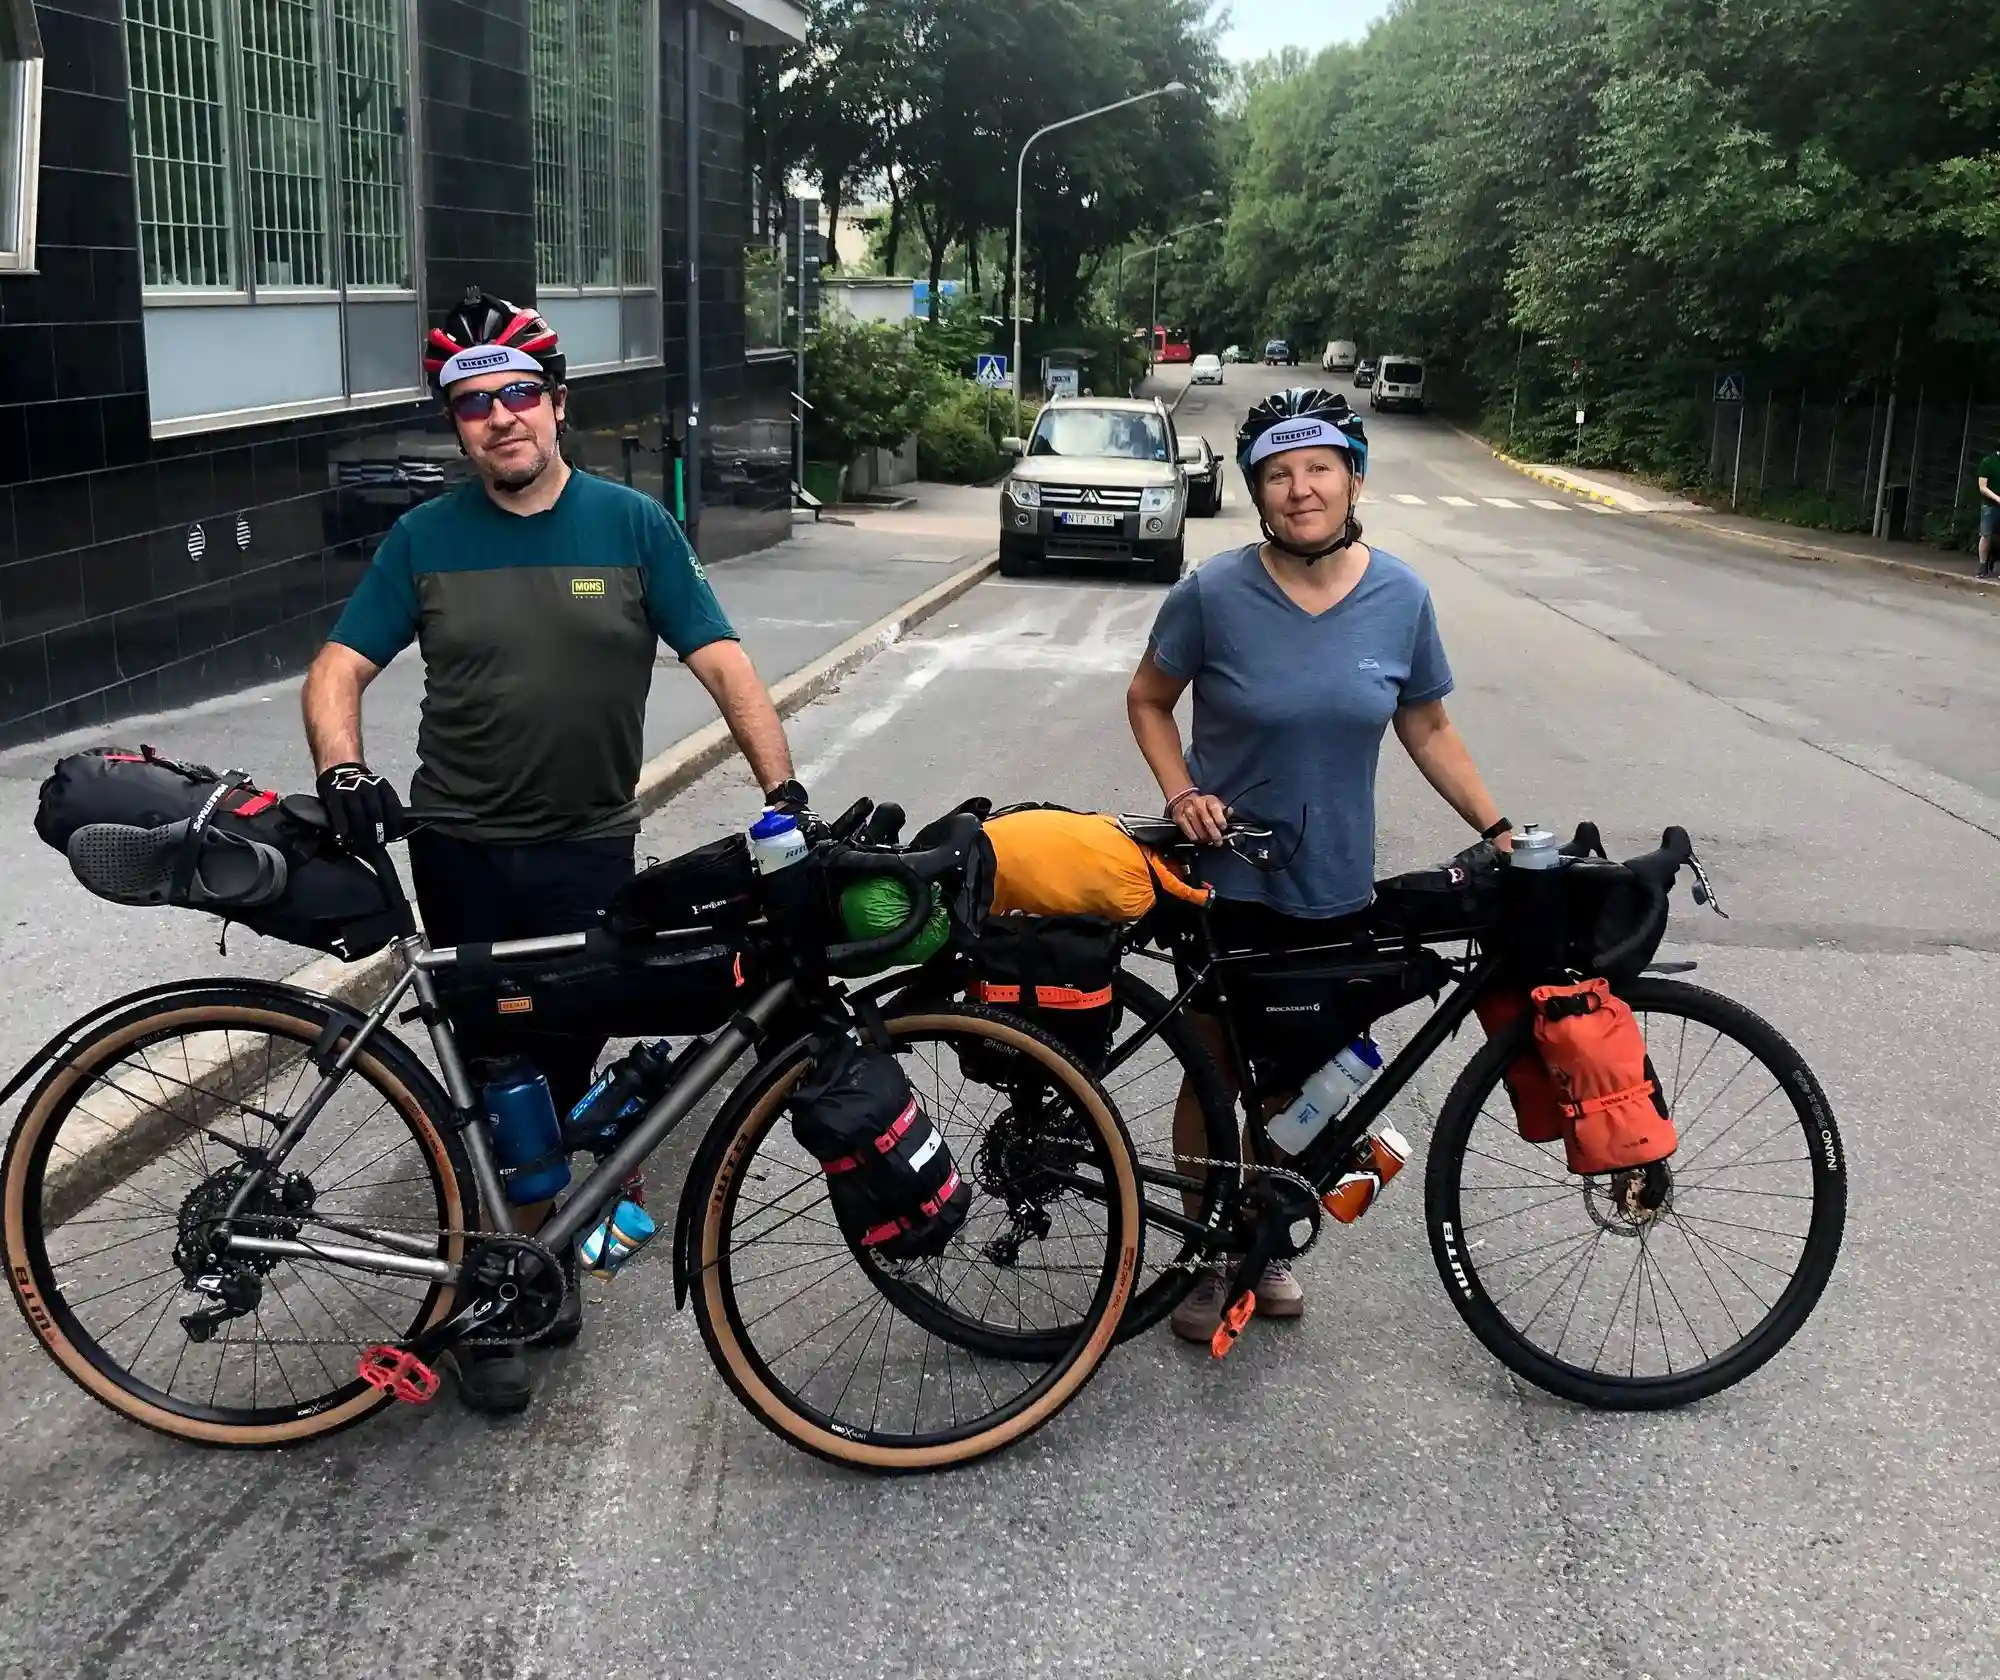 My Introduction to bikepacking (part 5) - The ride begins